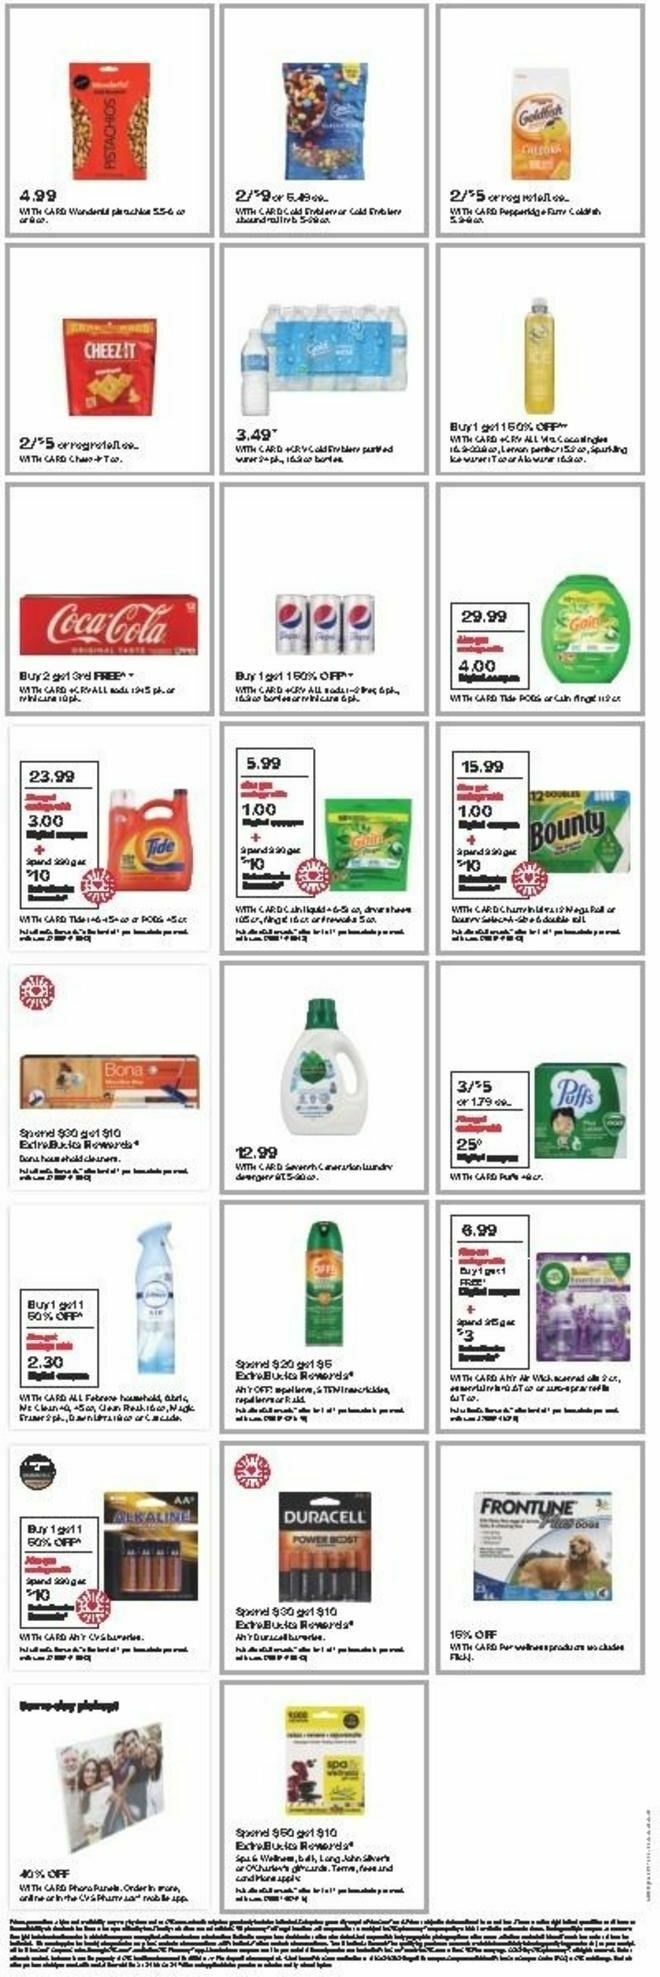 CVS Pharmacy Weekly Ad from April 7